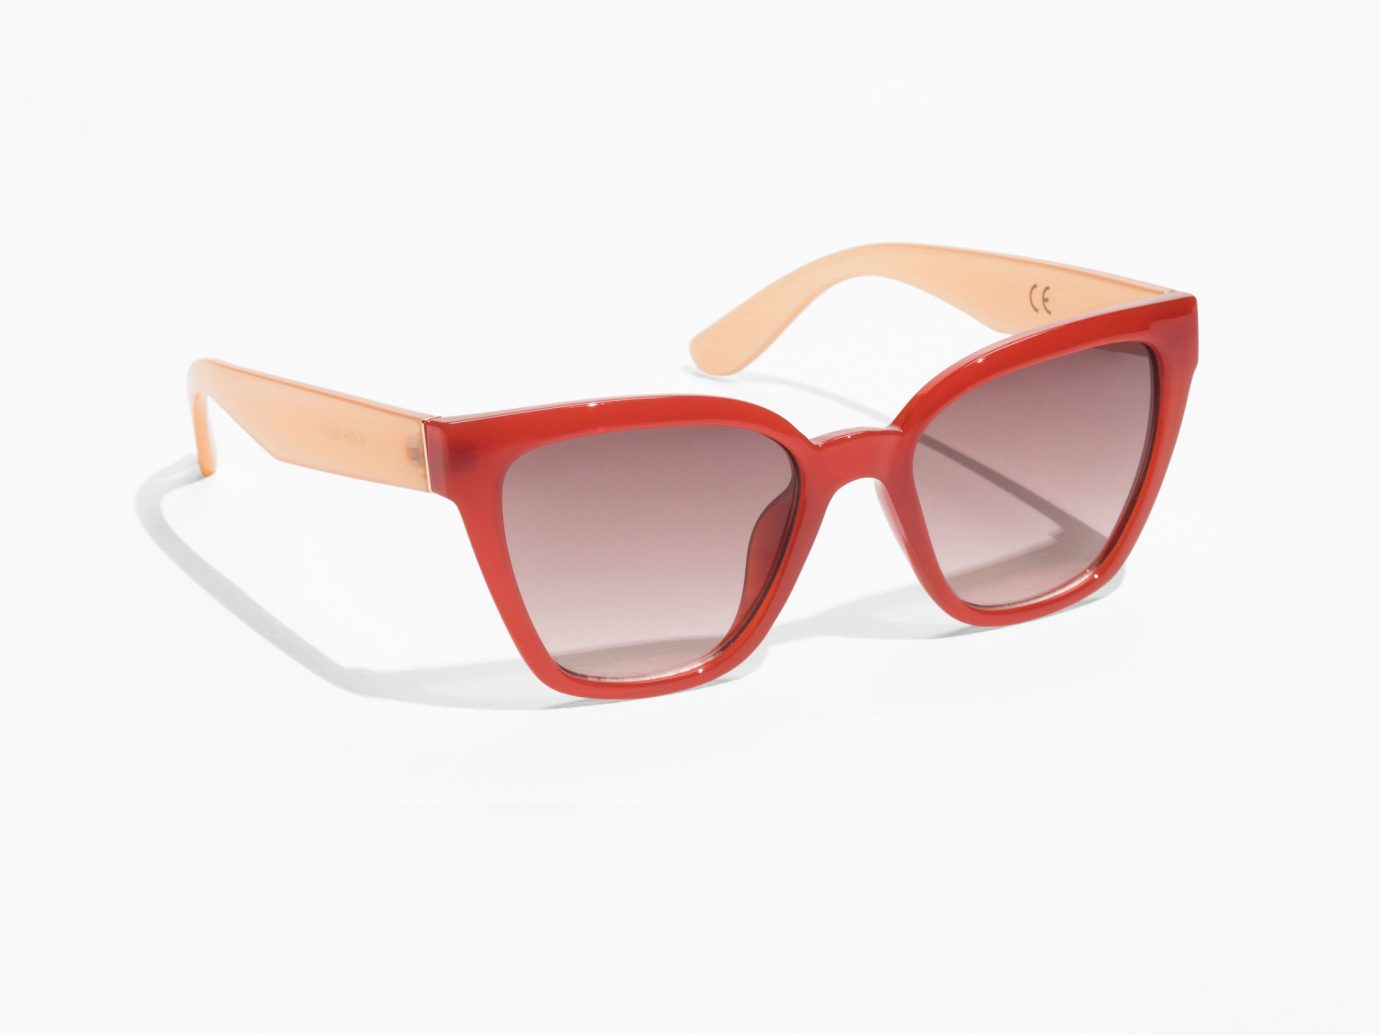 & Other Stories Cat Eye Sunglasses